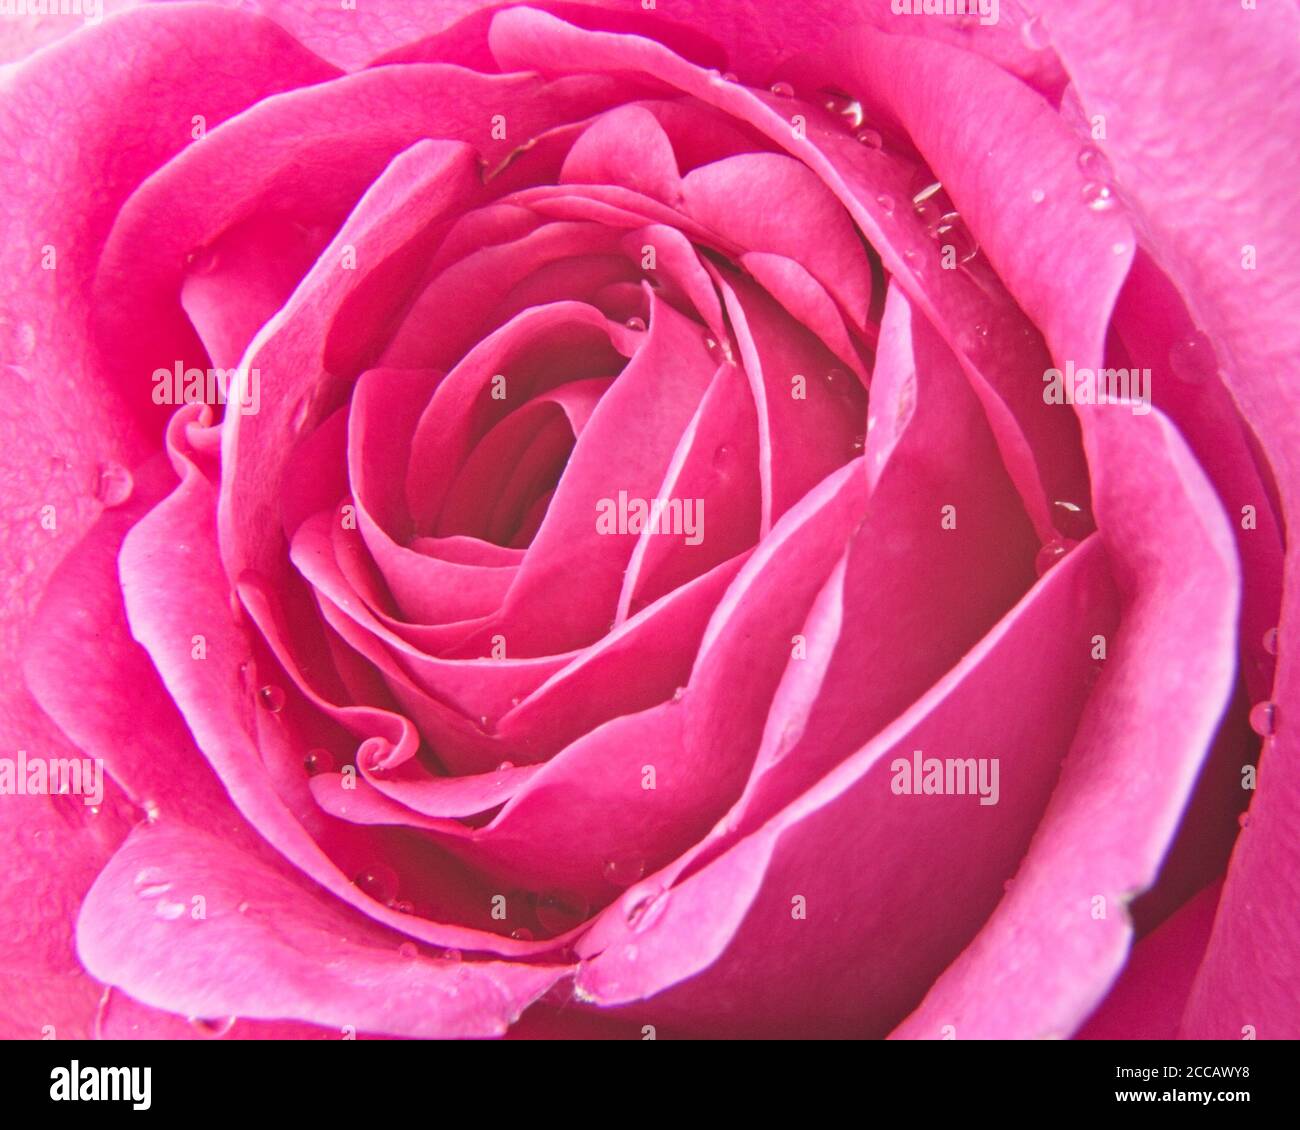 Close up image of pink common rose petals with raindrops. Stock Photo